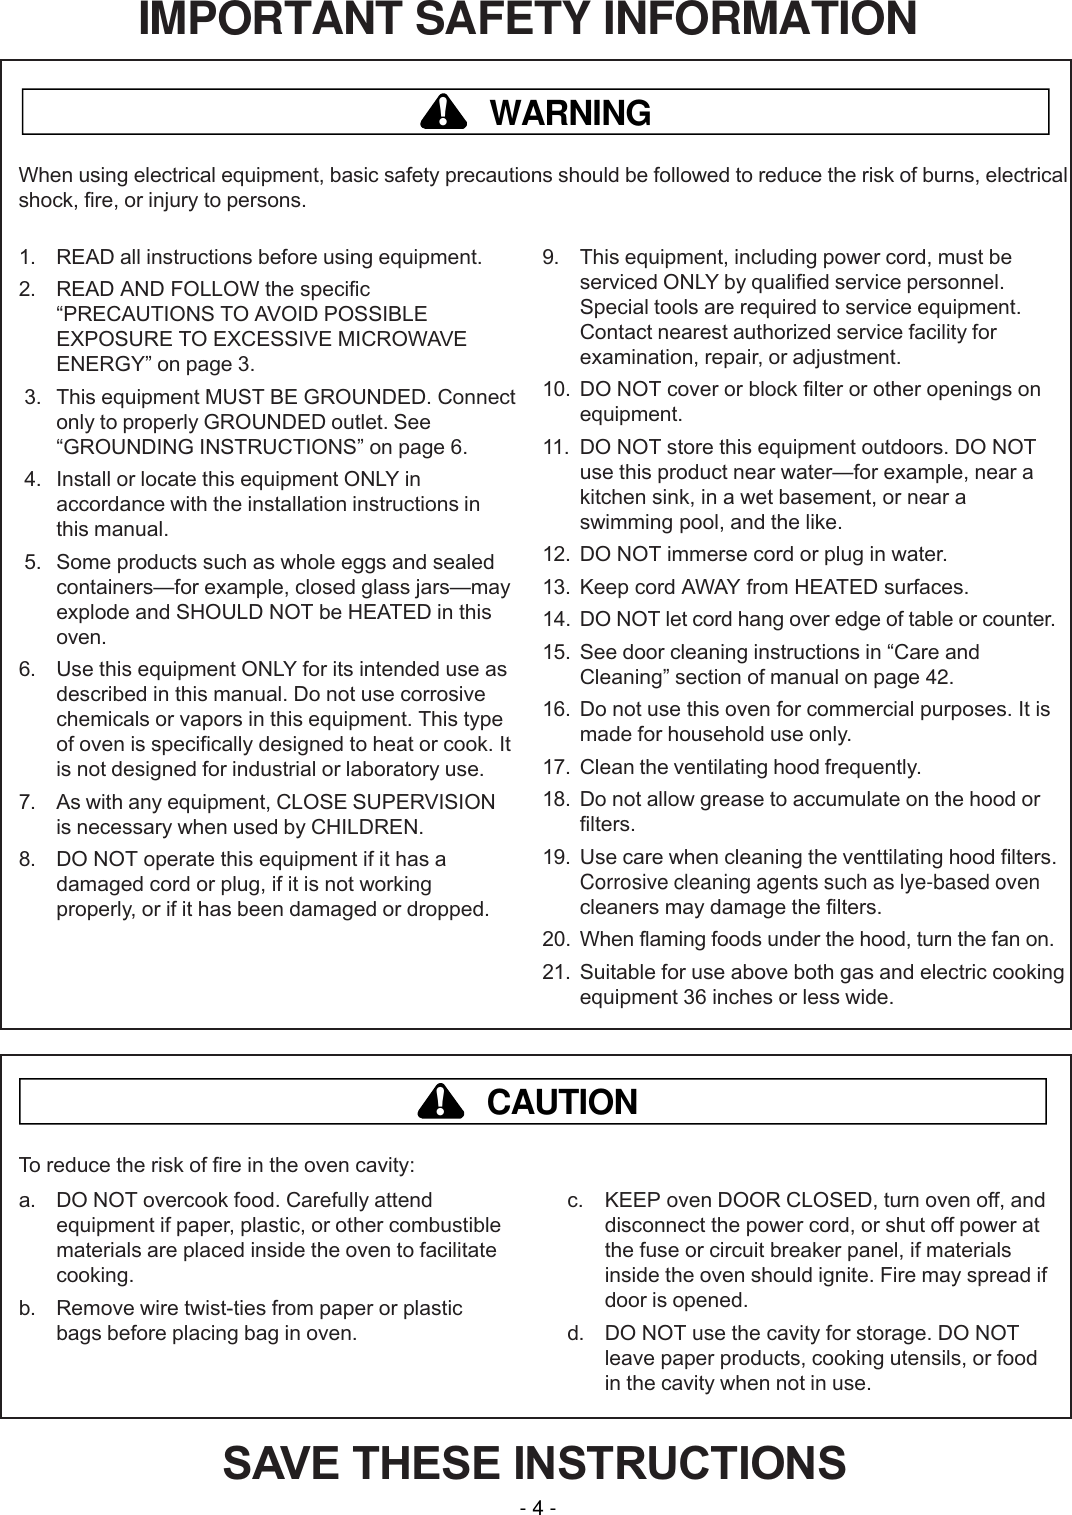 IMPORTANT SAFETY INFORMATIONSAVE THESE INSTRUCTIONS1. READ all instructions before using equipment.2. READ AND FOLLOW the specificPRECAUTIONS TO AVOID POSSIBLEEXPOSURE TO EXCESSIVE MICROWAVEENERGY on page 3. 3. This equipment MUST BE GROUNDED. Connectonly to properly GROUNDED outlet. SeeGROUNDING INSTRUCTIONS on page 6. 4. Install or locate this equipment ONLY inaccordance with the installation instructions inthis manual. 5. Some products such as whole eggs and sealedcontainersfor example, closed glass jarsmayexplode and SHOULD NOT be HEATED in thisoven.6. Use this equipment ONLY for its intended use asdescribed in this manual. Do not use corrosivechemicals or vapors in this equipment. This typeof oven is specifically designed to heat or cook. Itis not designed for industrial or laboratory use.7. As with any equipment, CLOSE SUPERVISIONis necessary when used by CHILDREN.8. DO NOT operate this equipment if it has adamaged cord or plug, if it is not workingproperly, or if it has been damaged or dropped.9. This equipment, including power cord, must beserviced ONLY by qualified service personnel.Special tools are required to service equipment.Contact nearest authorized service facility forexamination, repair, or adjustment.10. DO NOT cover or block filter or other openings onequipment.11. DO NOT store this equipment outdoors. DO NOTuse this product near waterfor example, near akitchen sink, in a wet basement, or near aswimming pool, and the like.12. DO NOT immerse cord or plug in water.13. Keep cord AWAY from HEATED surfaces.14. DO NOT let cord hang over edge of table or counter.15. See door cleaning instructions in Care andCleaning section of manual on page 42.16. Do not use this oven for commercial purposes. It ismade for household use only.17. Clean the ventilating hood frequently.18. Do not allow grease to accumulate on the hood orfilters.19. Use care when cleaning the venttilating hood filters.Corrosive cleaning agents such as lye-based ovencleaners may damage the filters.20. When flaming foods under the hood, turn the fan on.21. Suitable for use above both gas and electric cookingequipment 36 inches or less wide.WARNING!When using electrical equipment, basic safety precautions should be followed to reduce the risk of burns, electricalshock, fire, or injury to persons.a. DO NOT overcook food. Carefully attendequipment if paper, plastic, or other combustiblematerials are placed inside the oven to facilitatecooking.b. Remove wire twist-ties from paper or plasticbags before placing bag in oven.c. KEEP oven DOOR CLOSED, turn oven off, anddisconnect the power cord, or shut off power atthe fuse or circuit breaker panel, if materialsinside the oven should ignite. Fire may spread ifdoor is opened.d. DO NOT use the cavity for storage. DO NOTleave paper products, cooking utensils, or foodin the cavity when not in use.CAUTION!To reduce the risk of fire in the oven cavity:- 4 -